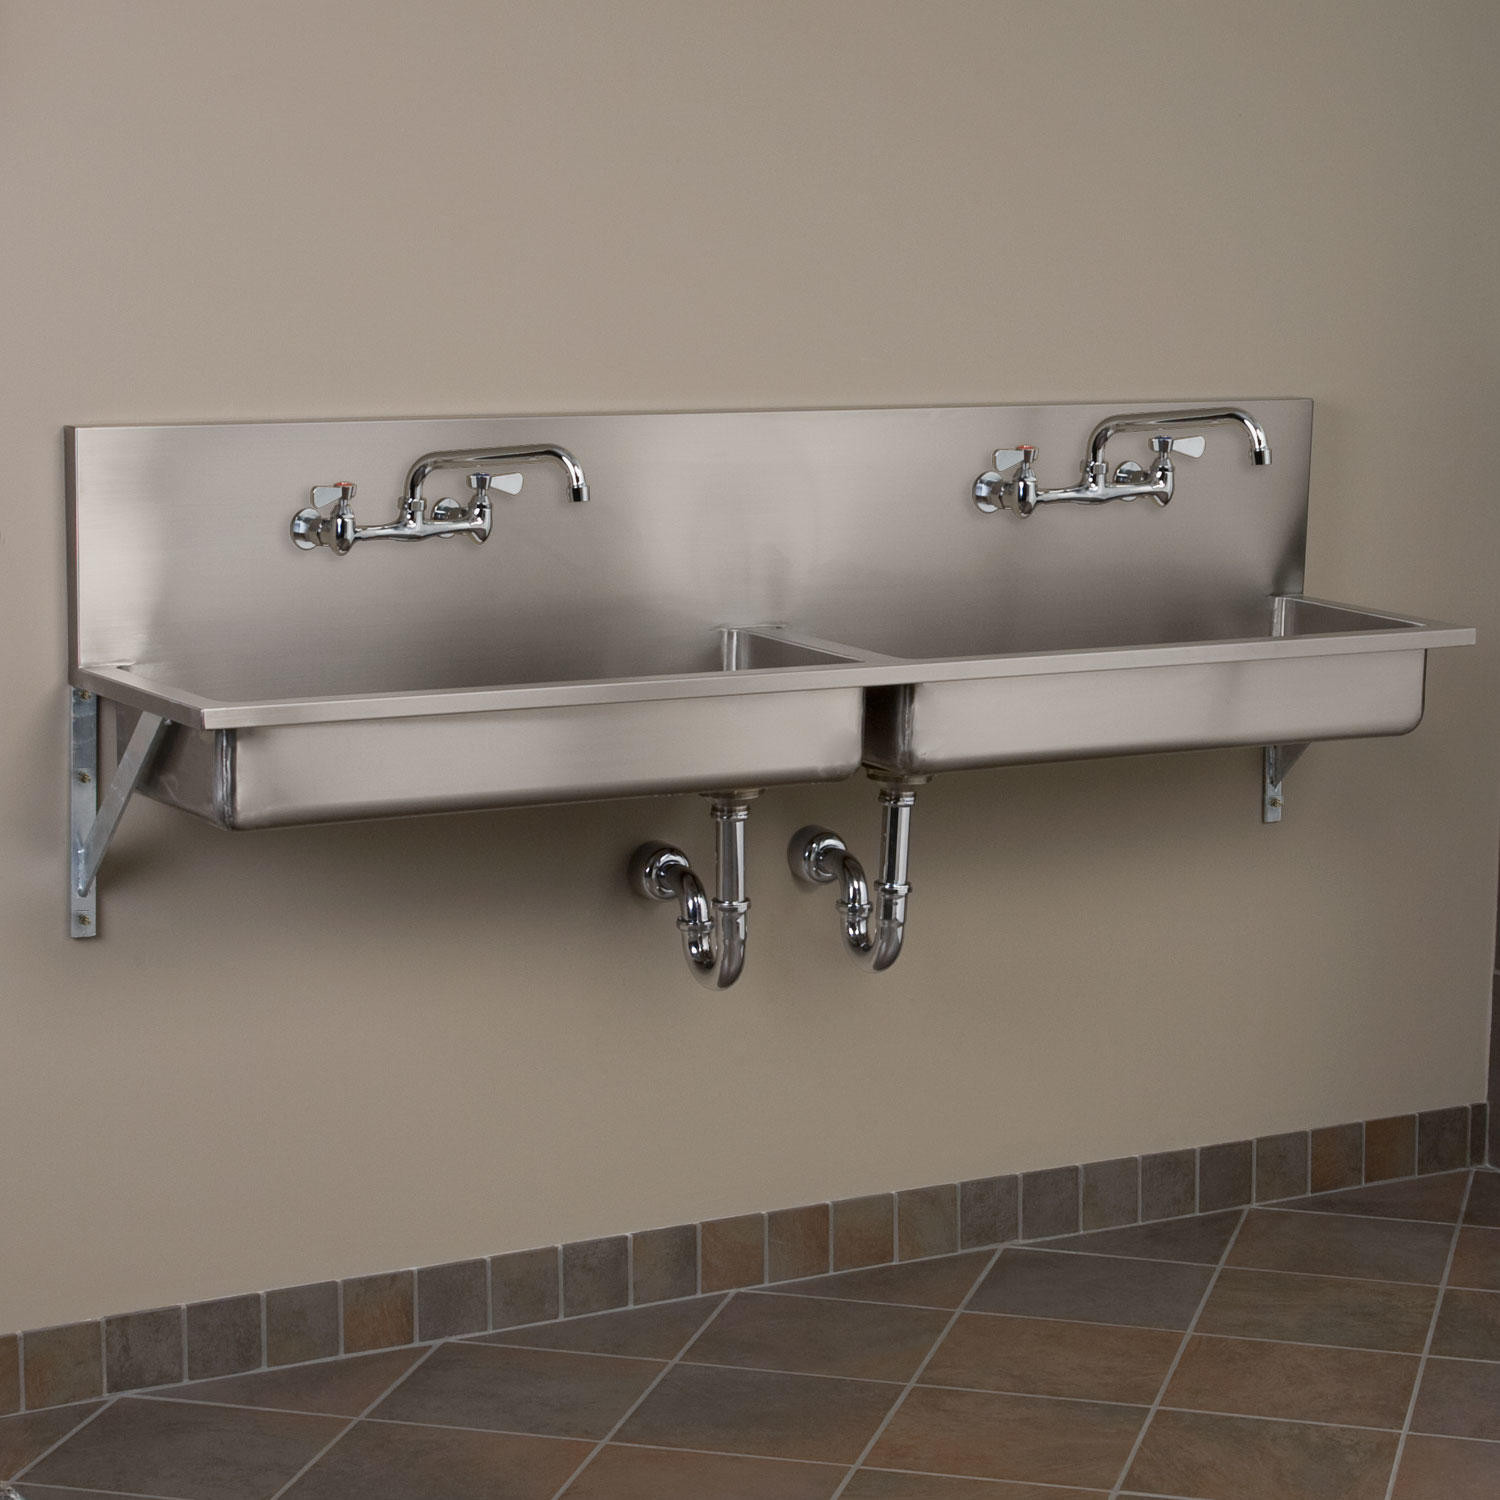 Wall Mounted Kitchen Sinks
 72" Double Bowl Stainless Steel Wall Mount mercial Sink